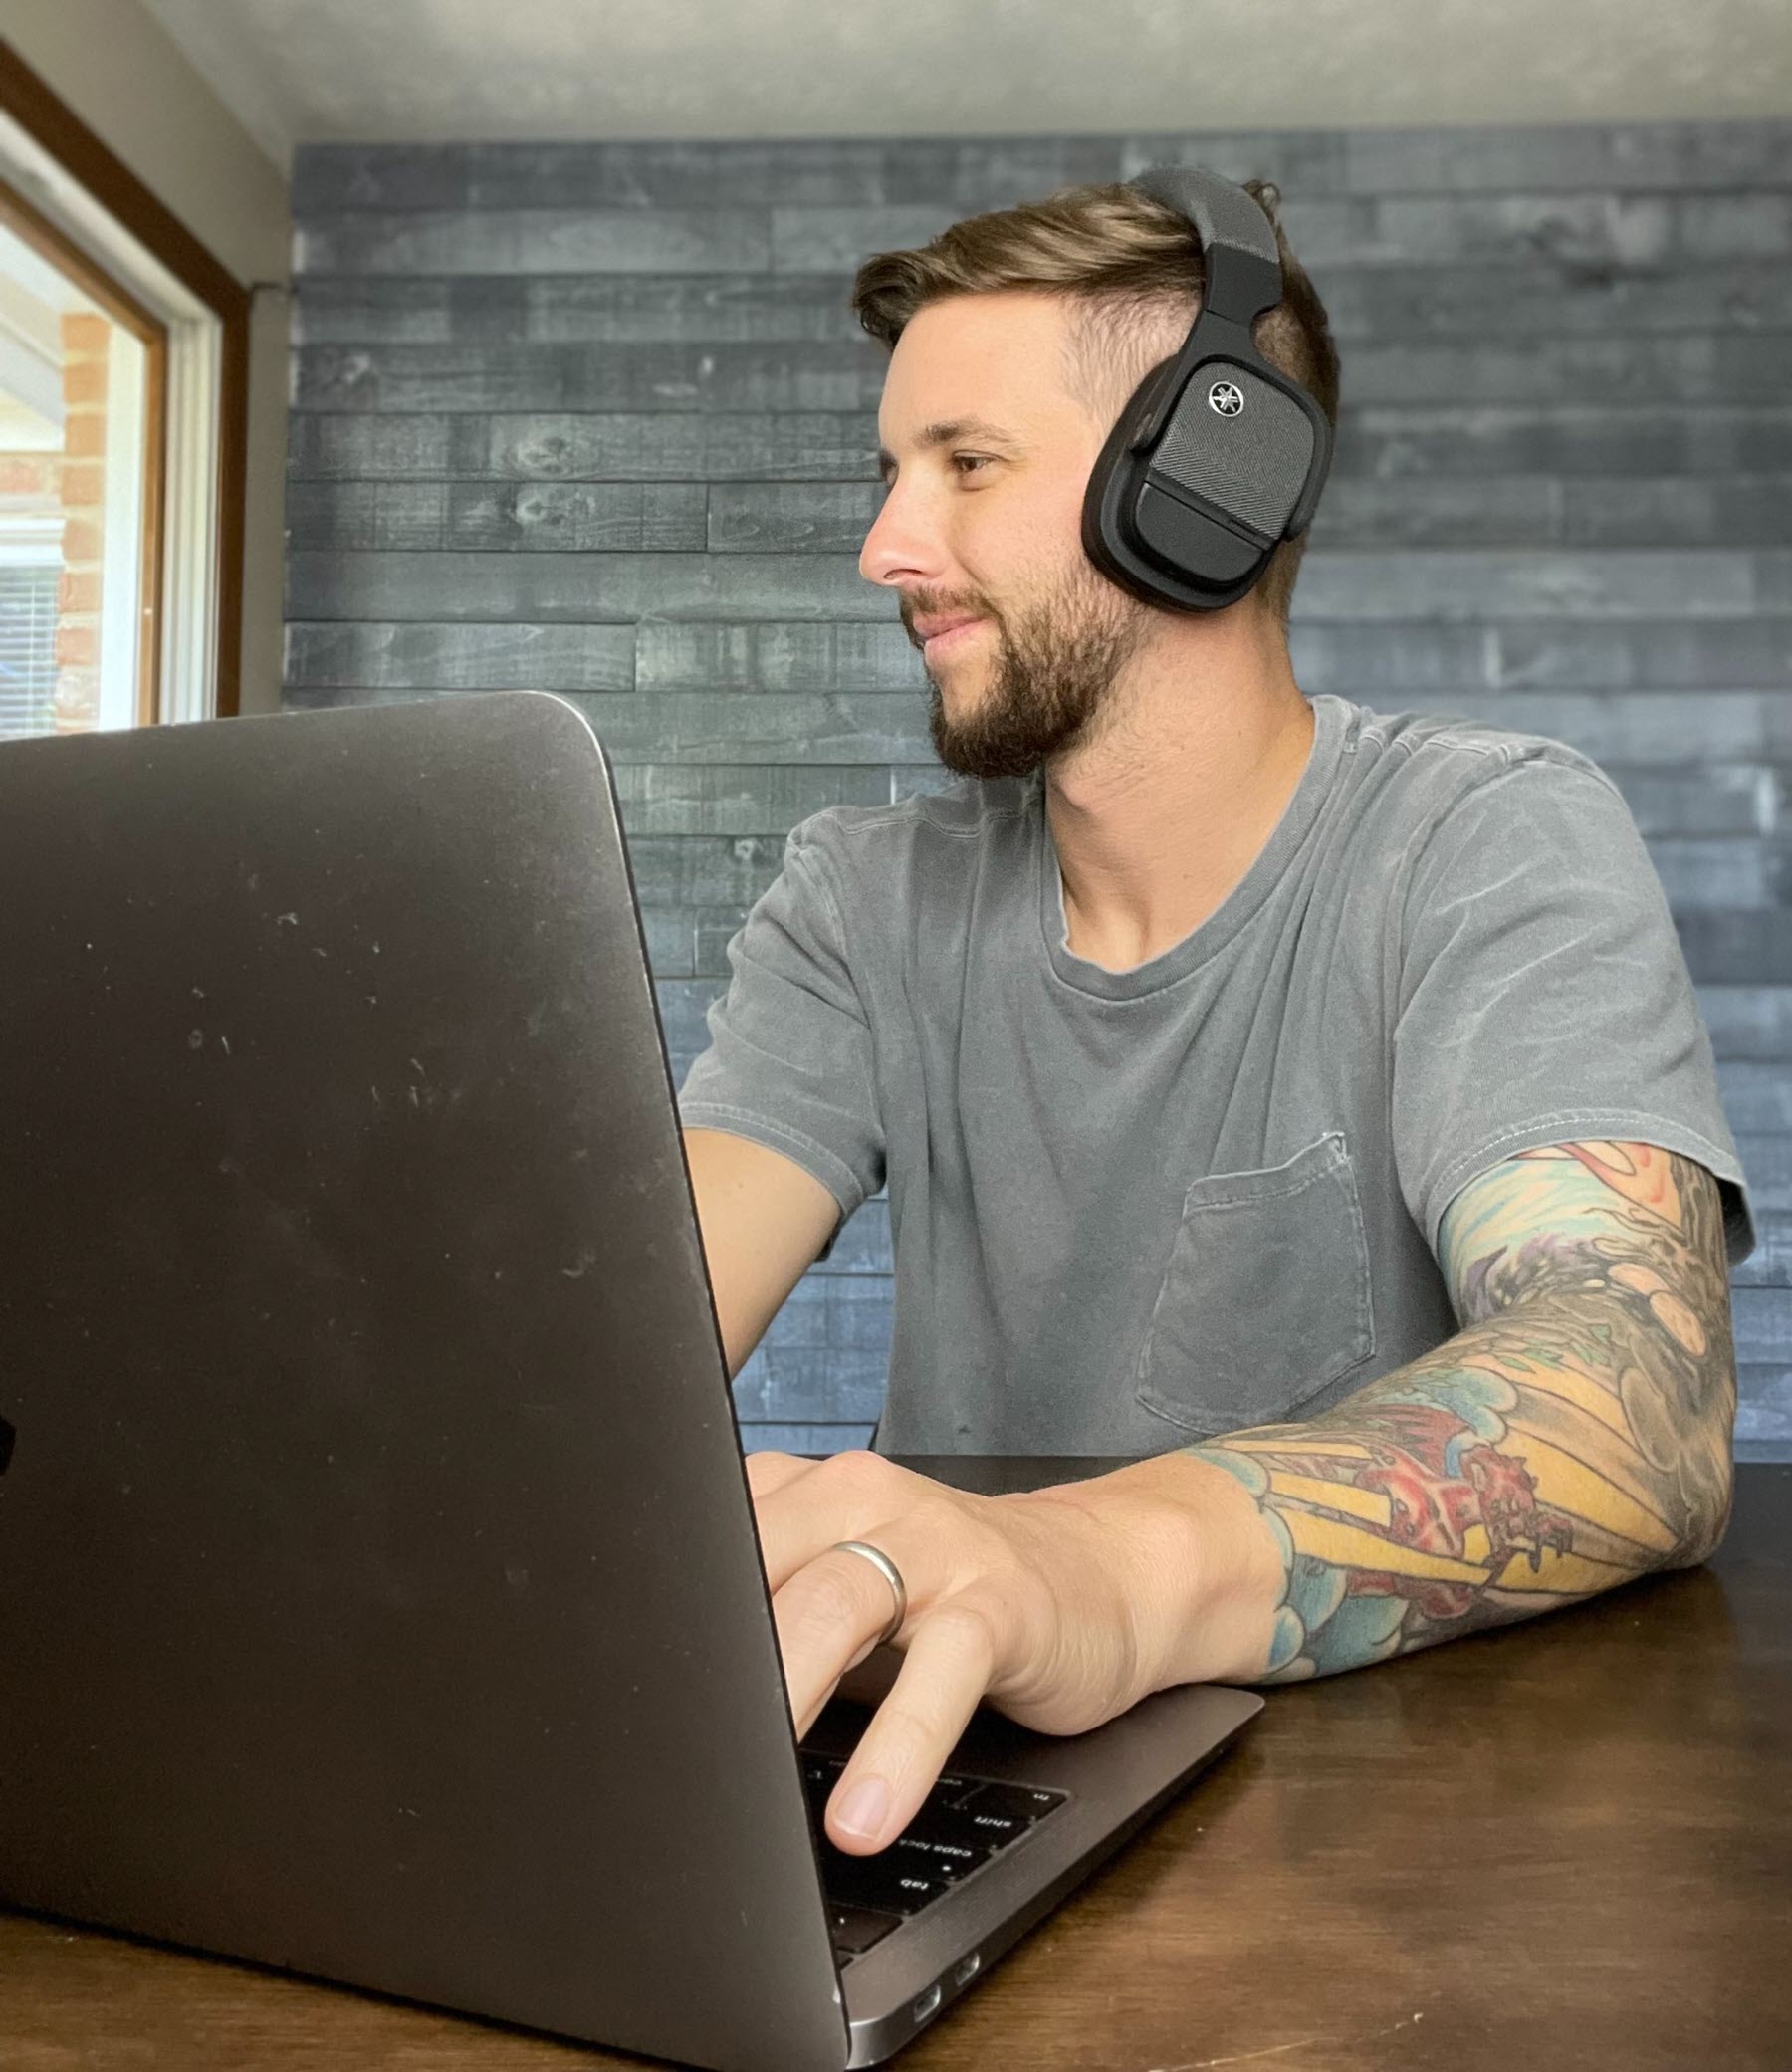 Man in his 30's with facial hair and tattoos on his lower arms is in front of a laptop wearing Yamaha wireless headphones.